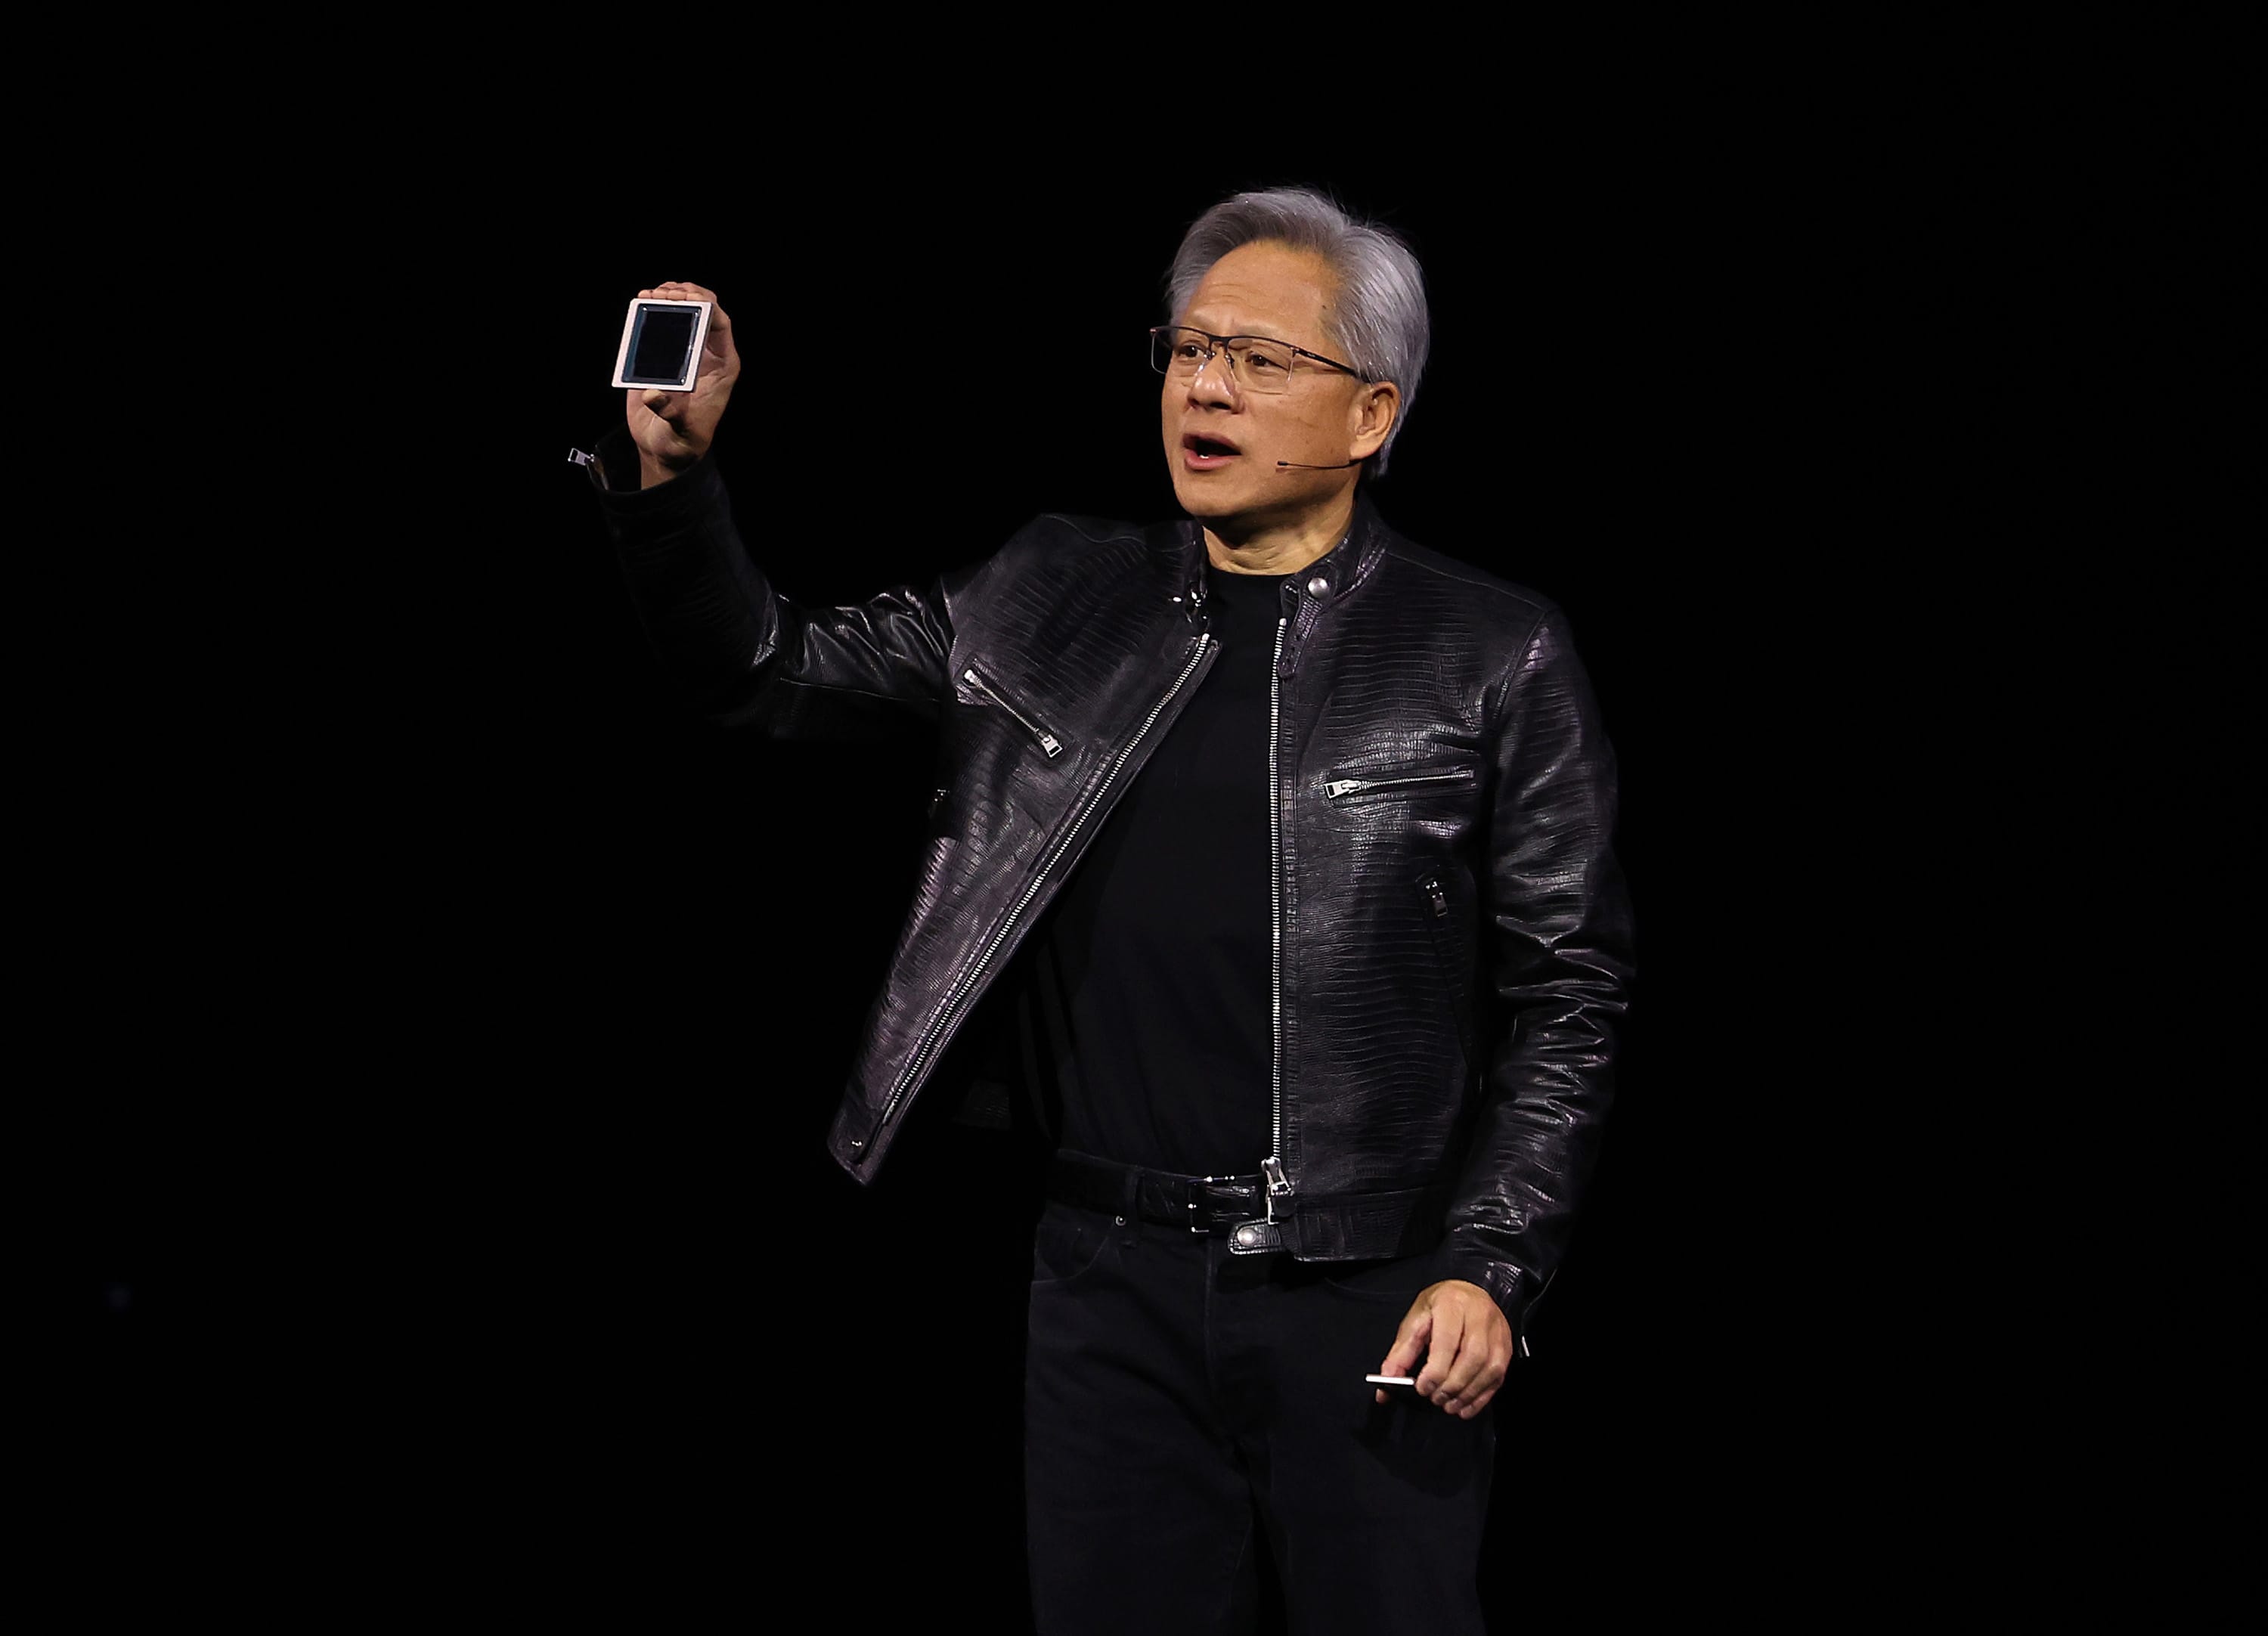 Nvidia’s AI ambitions in medicine and health care are becoming clear